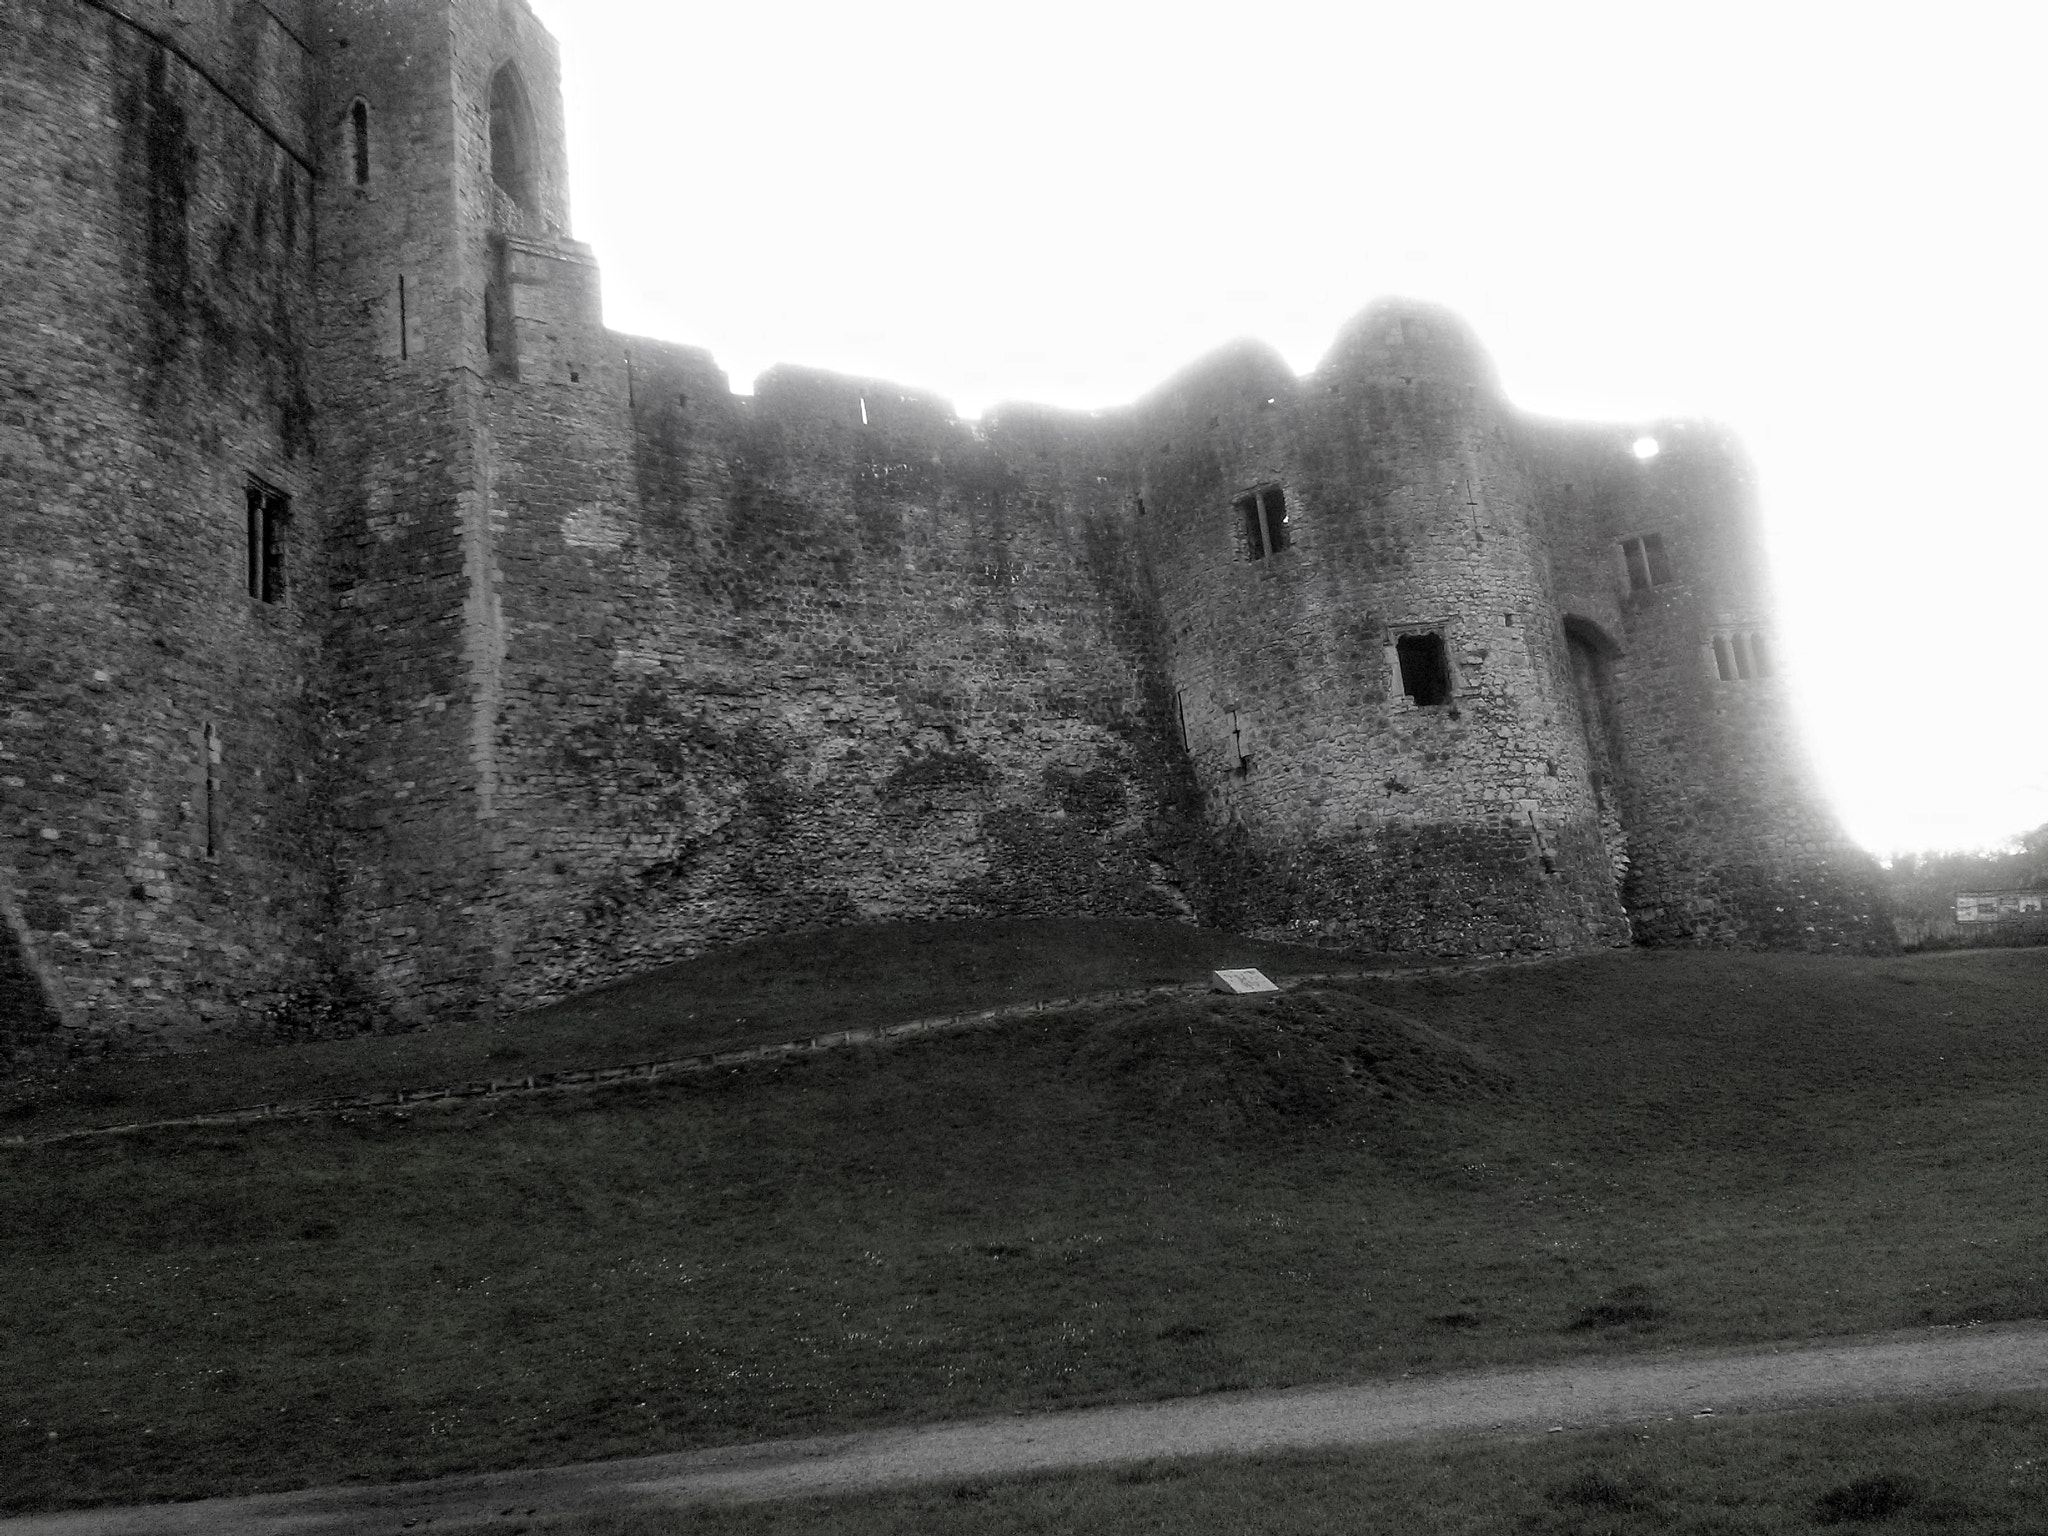 LG OPTIMUS L7 II sample photo. Castle in silvers photography